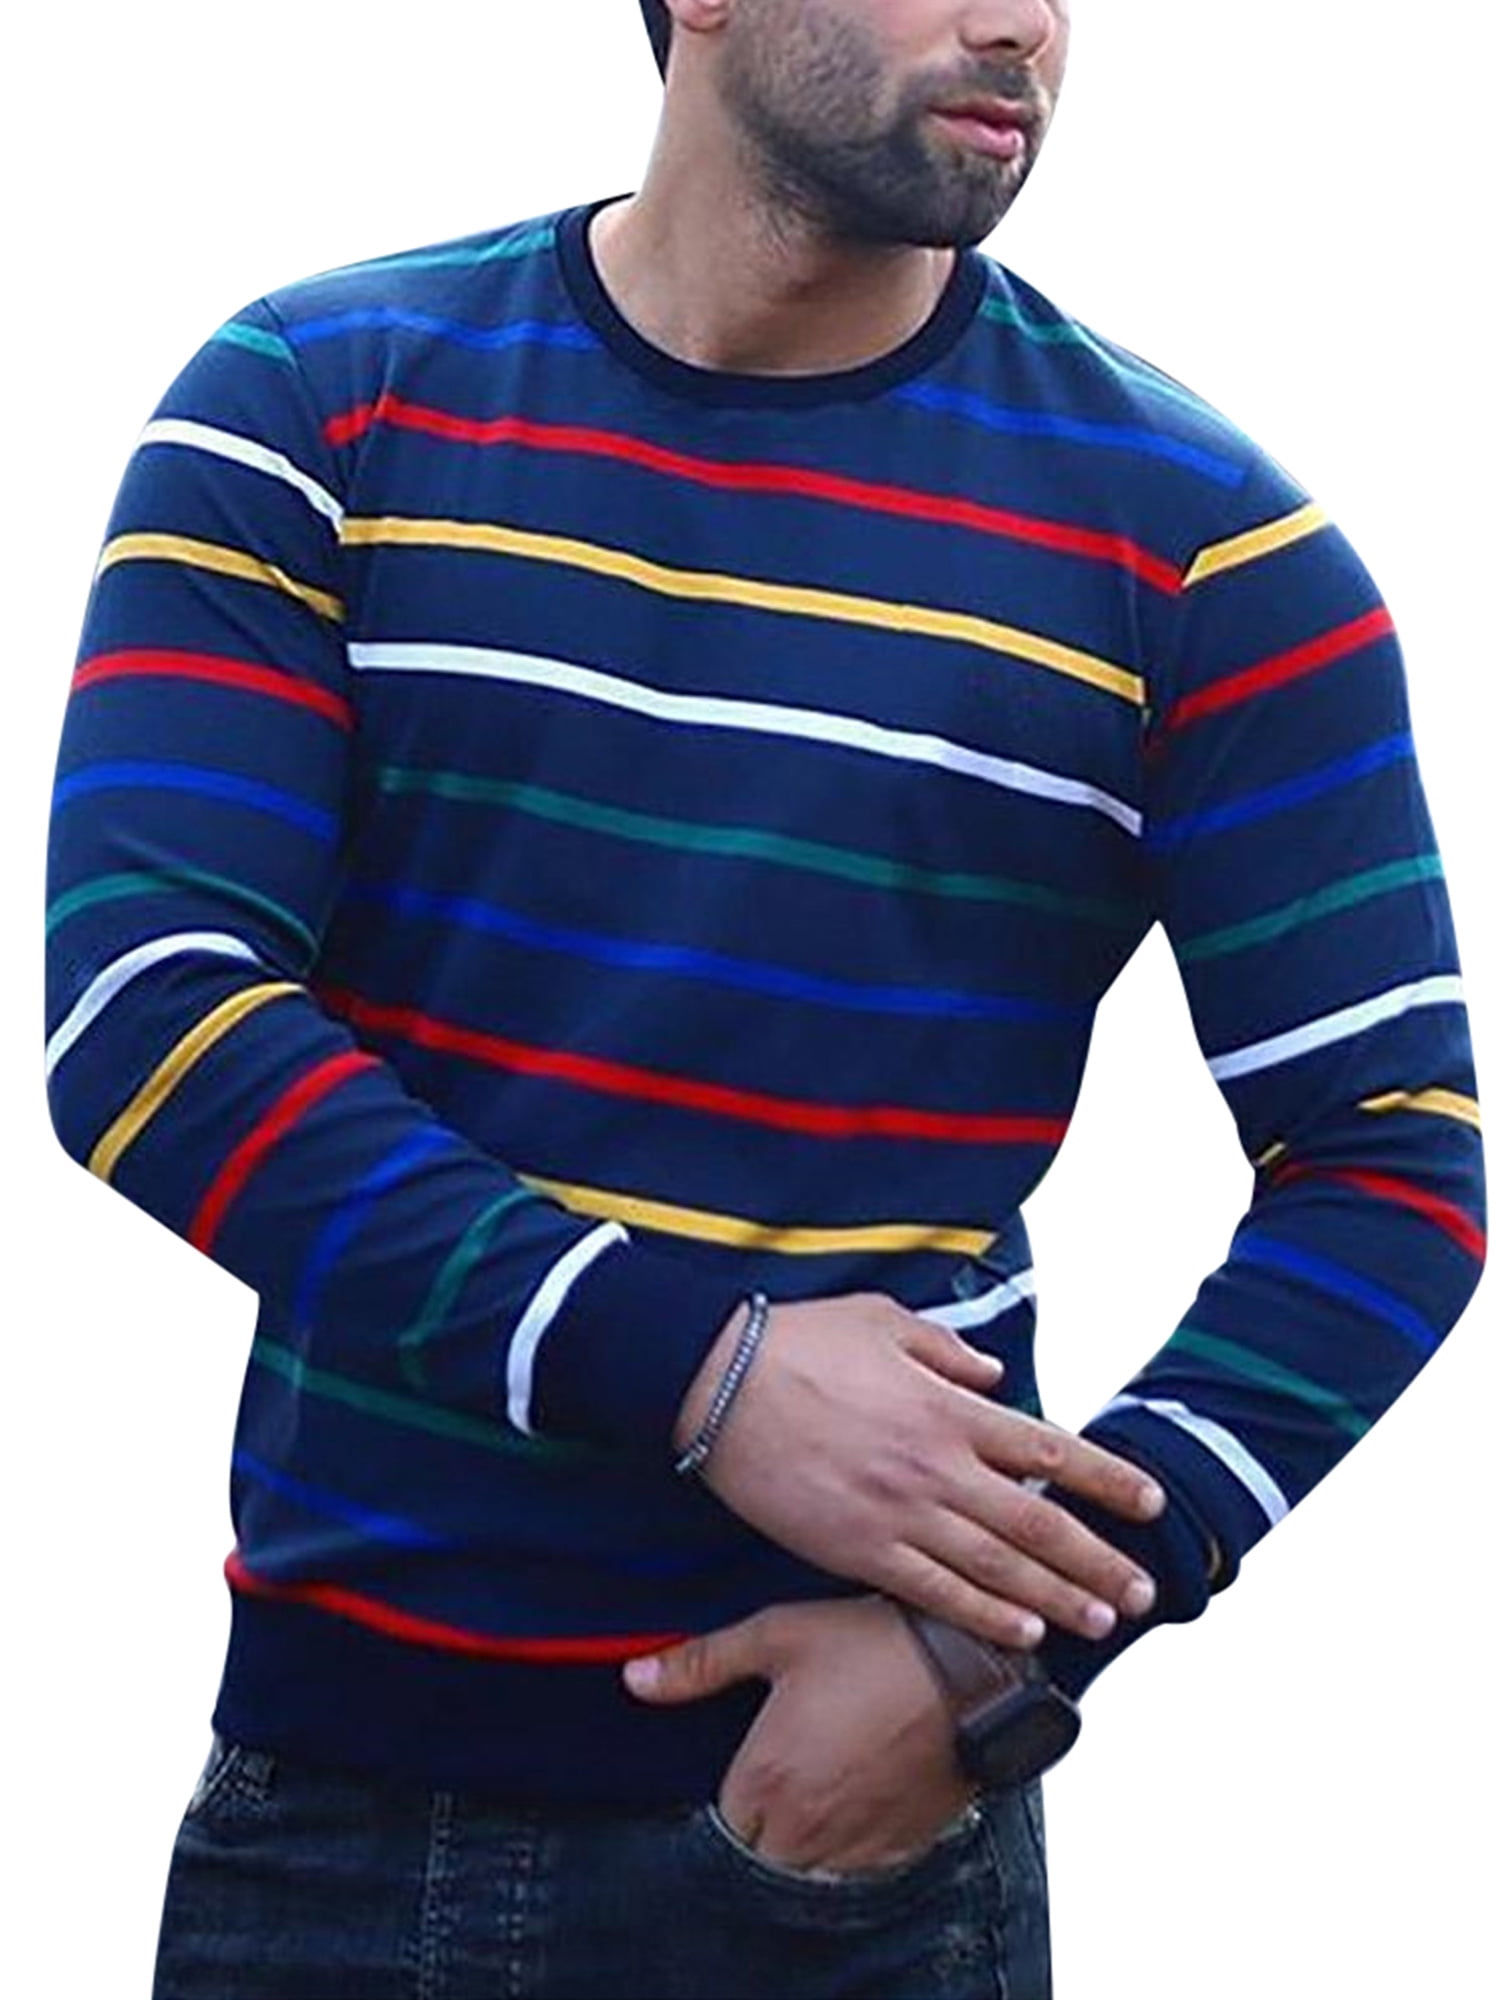 KaWaYi Mens Pullover Thermal Turtle Neck Colorful Dyeing Trim-Fit Long-Sleeve Sweaters